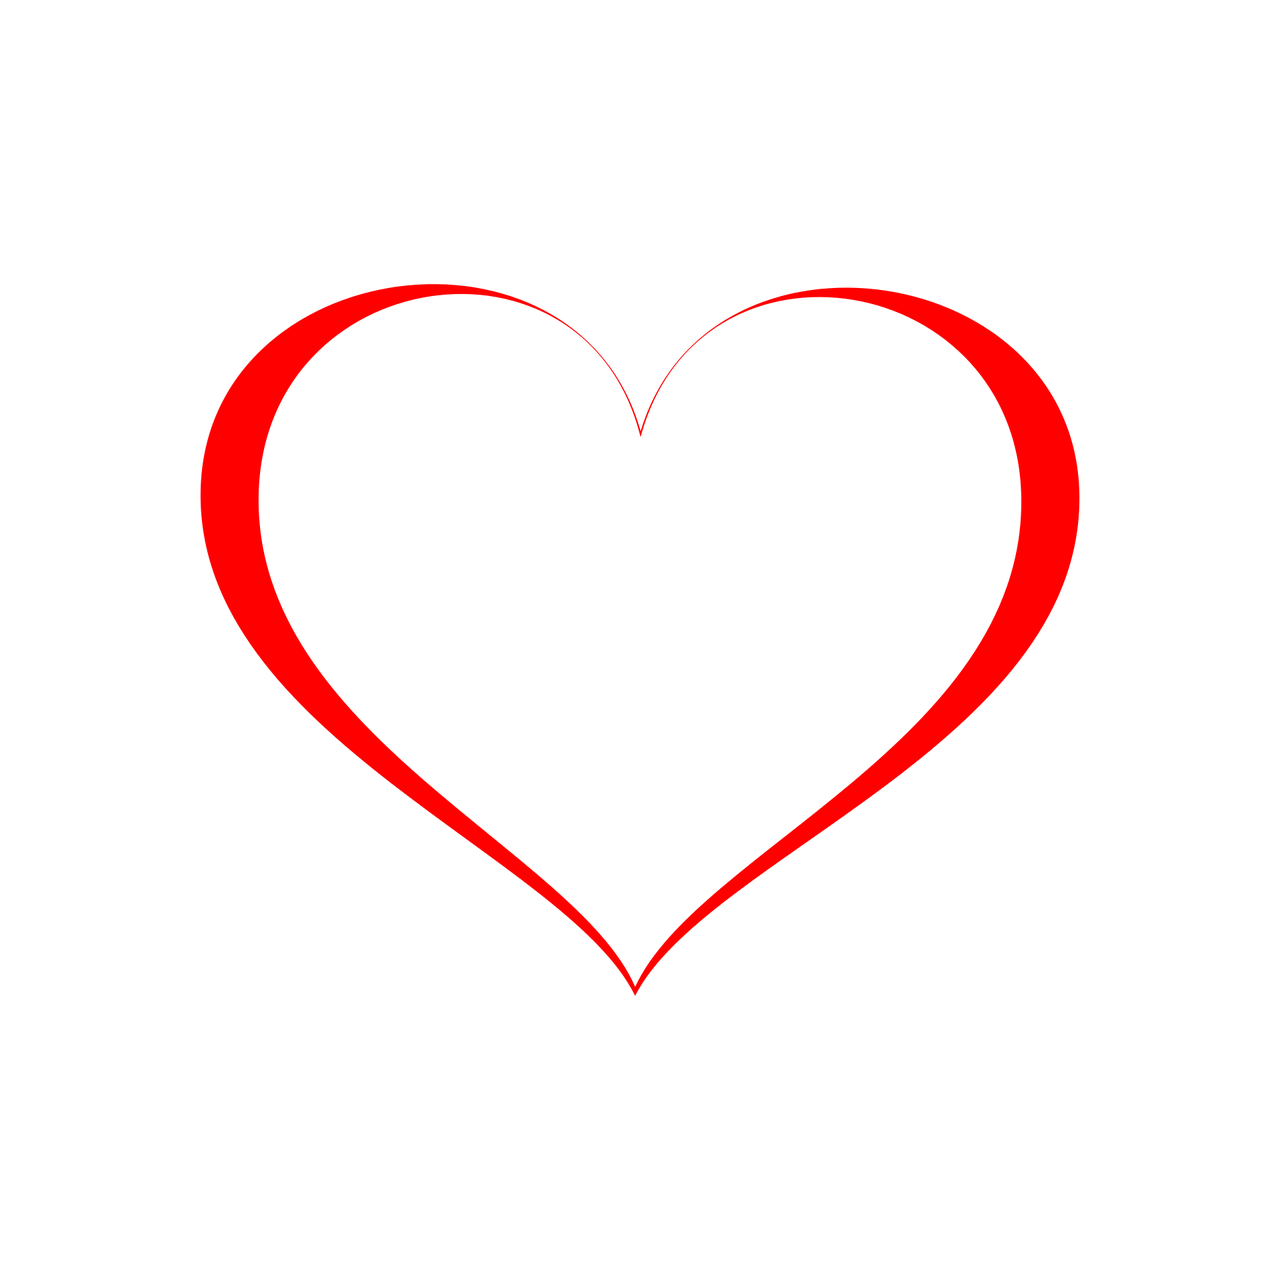 Download Red, Heart, Health. Royalty-Free Vector Graphic - Pixabay